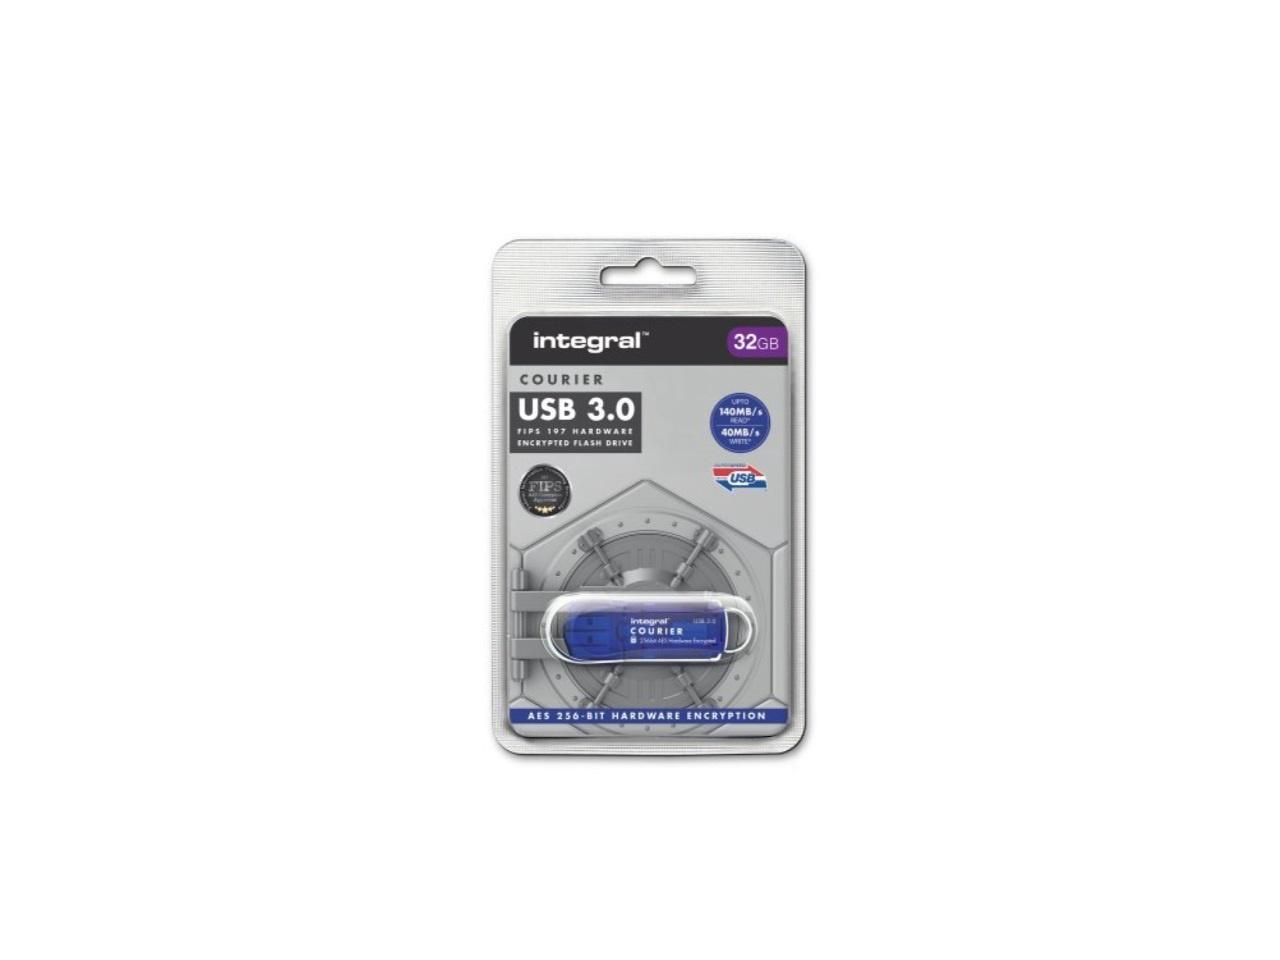 Integral 32GB COURIER FIPS 197 ENCRYPTED USB 3.0